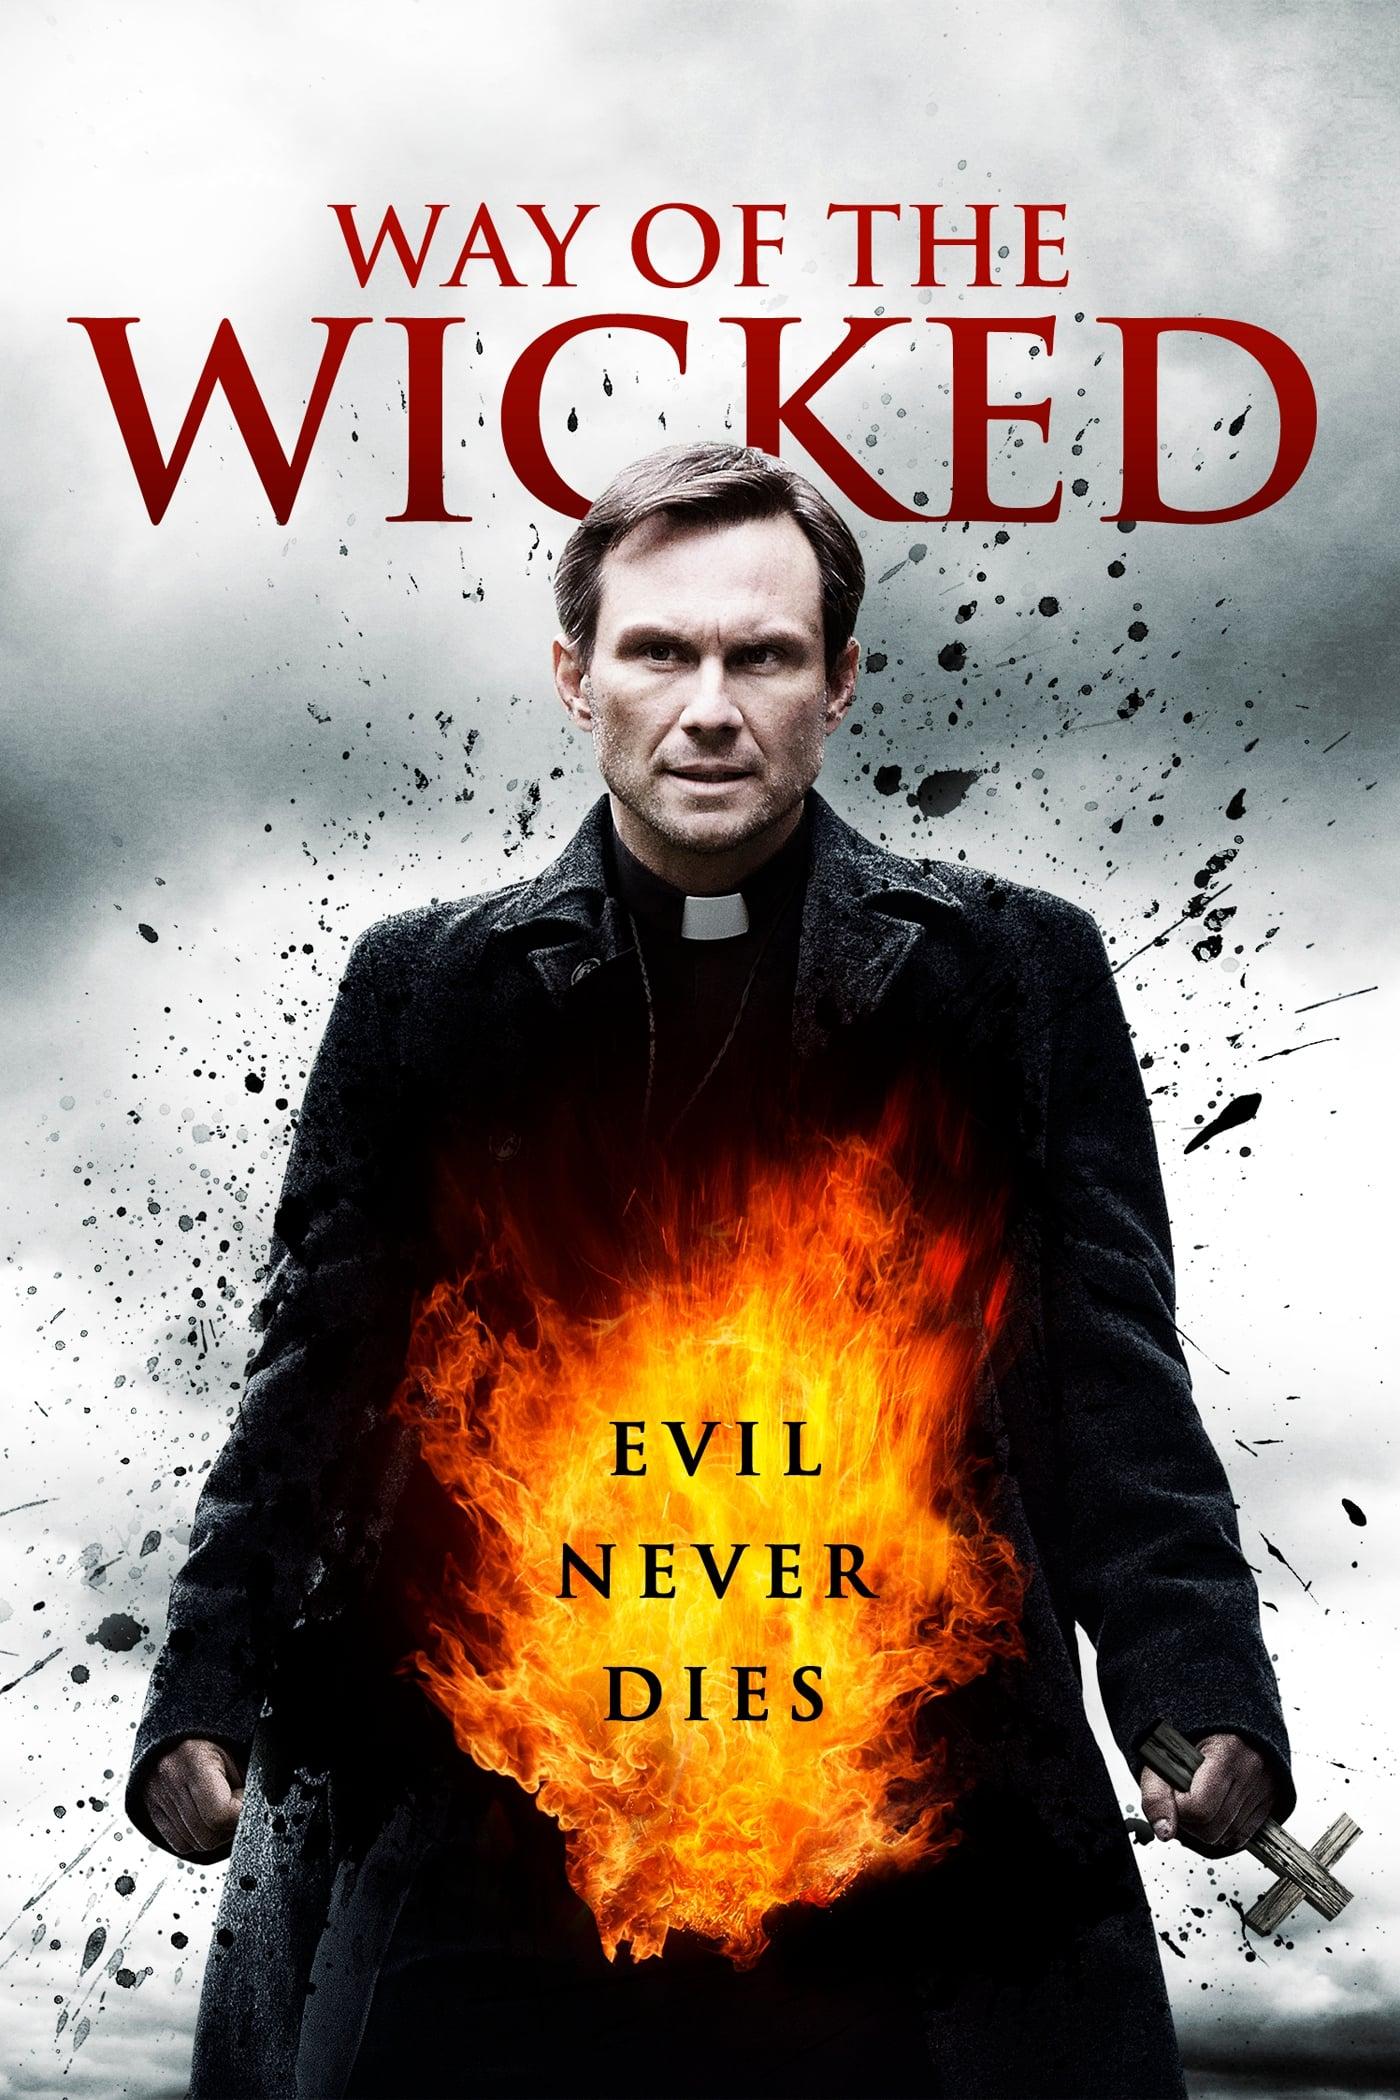 Way of the Wicked poster